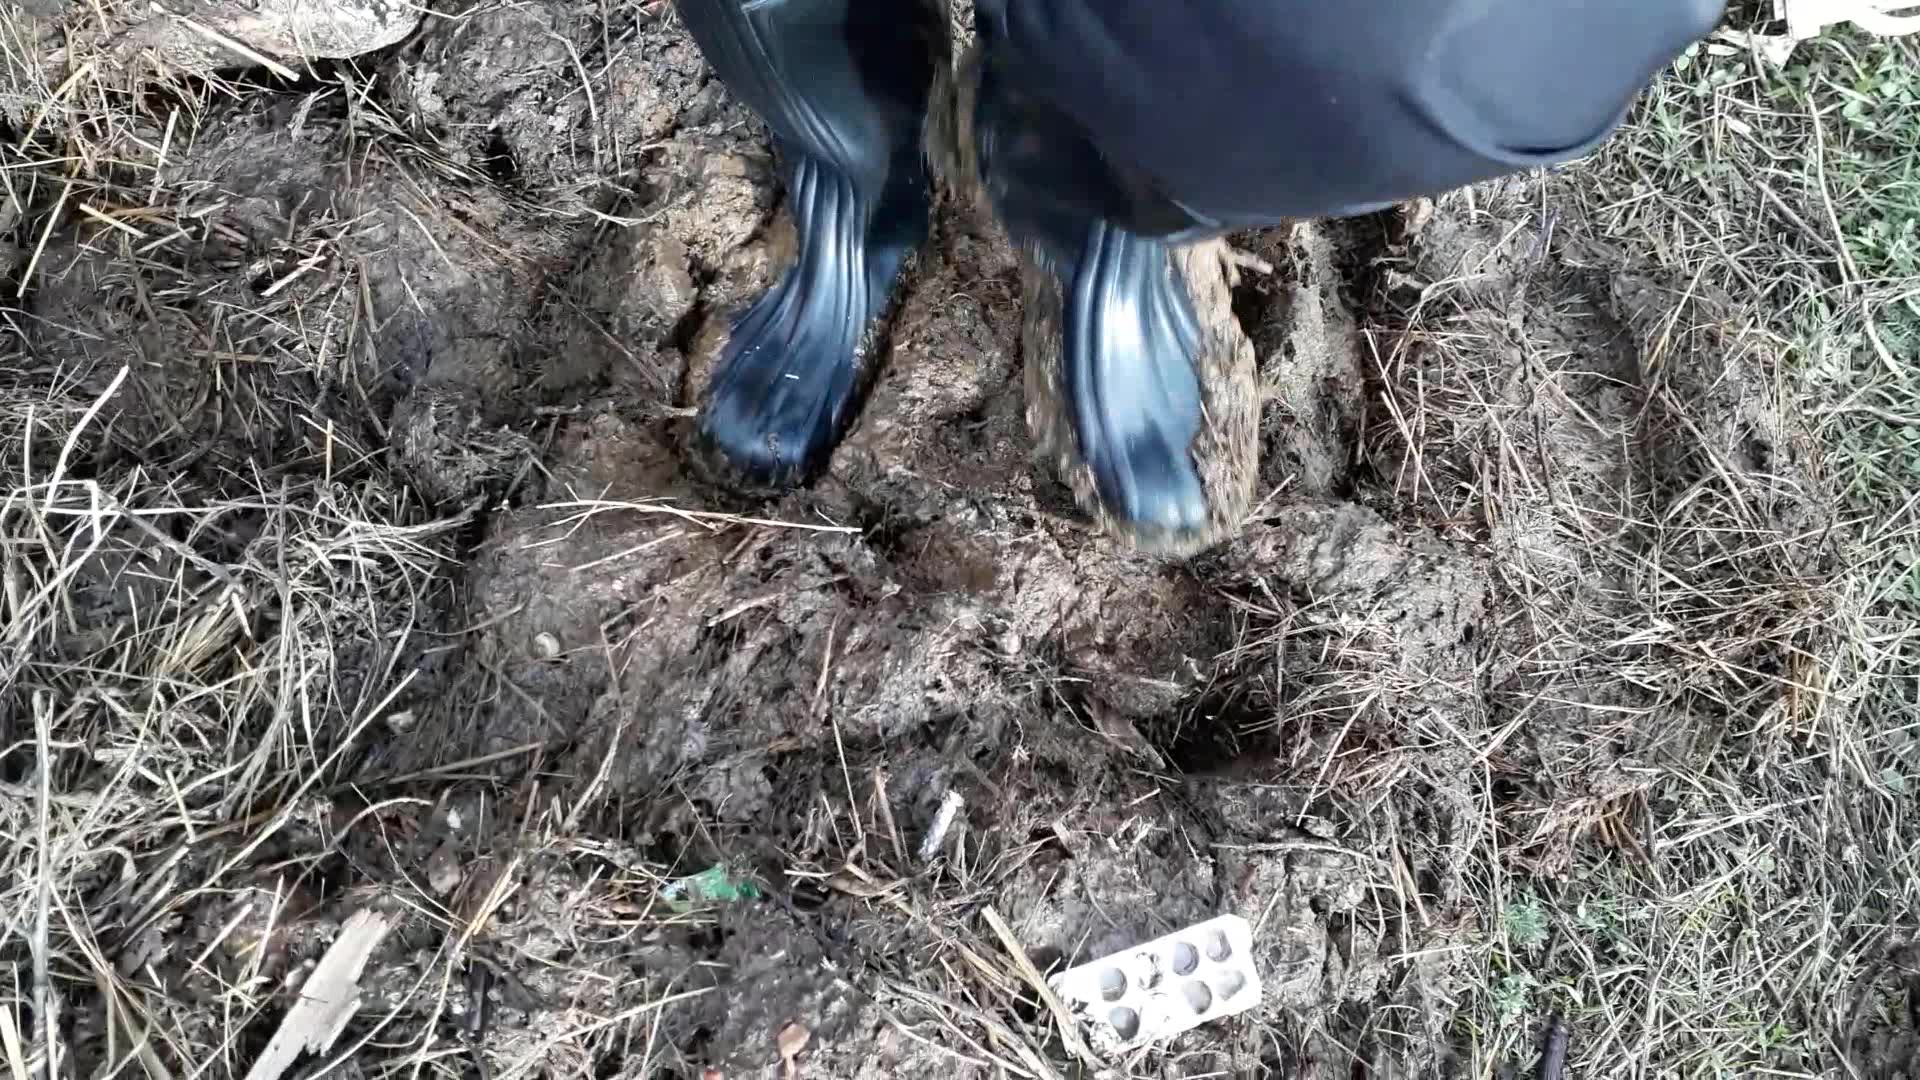 Rubber boots vs cowshit - video 17